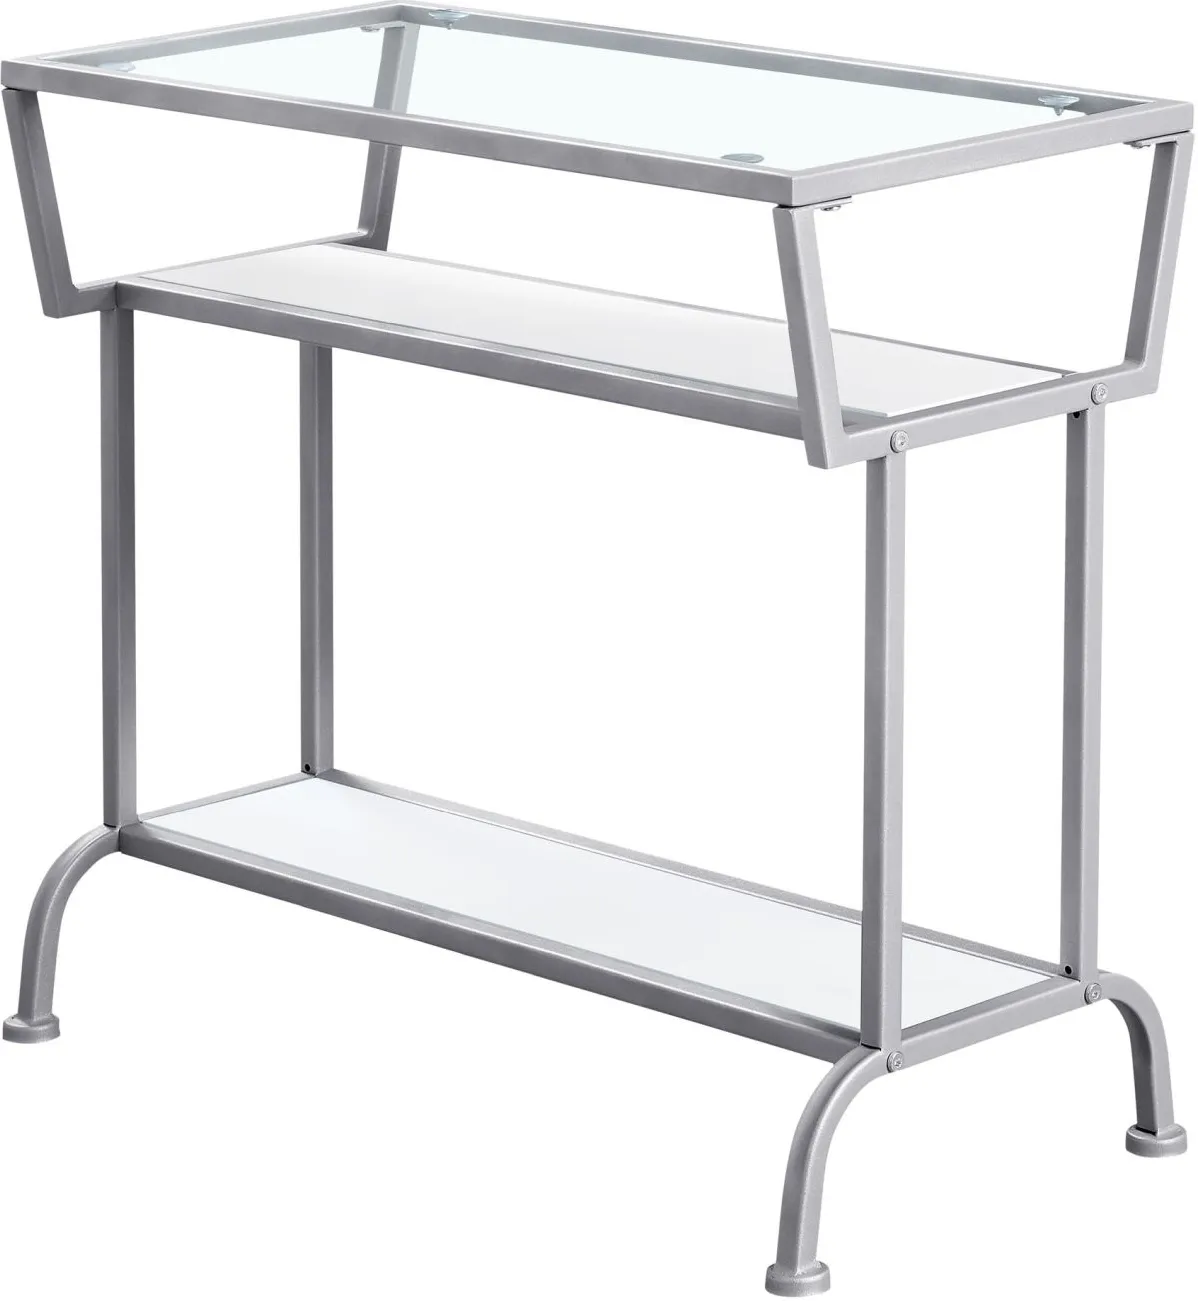 Accent Table, Side, End, Narrow, Small, 2 Tier, Living Room, Bedroom, Metal, Tempered Glass, Laminate, White, Grey, Contemporary, Modern